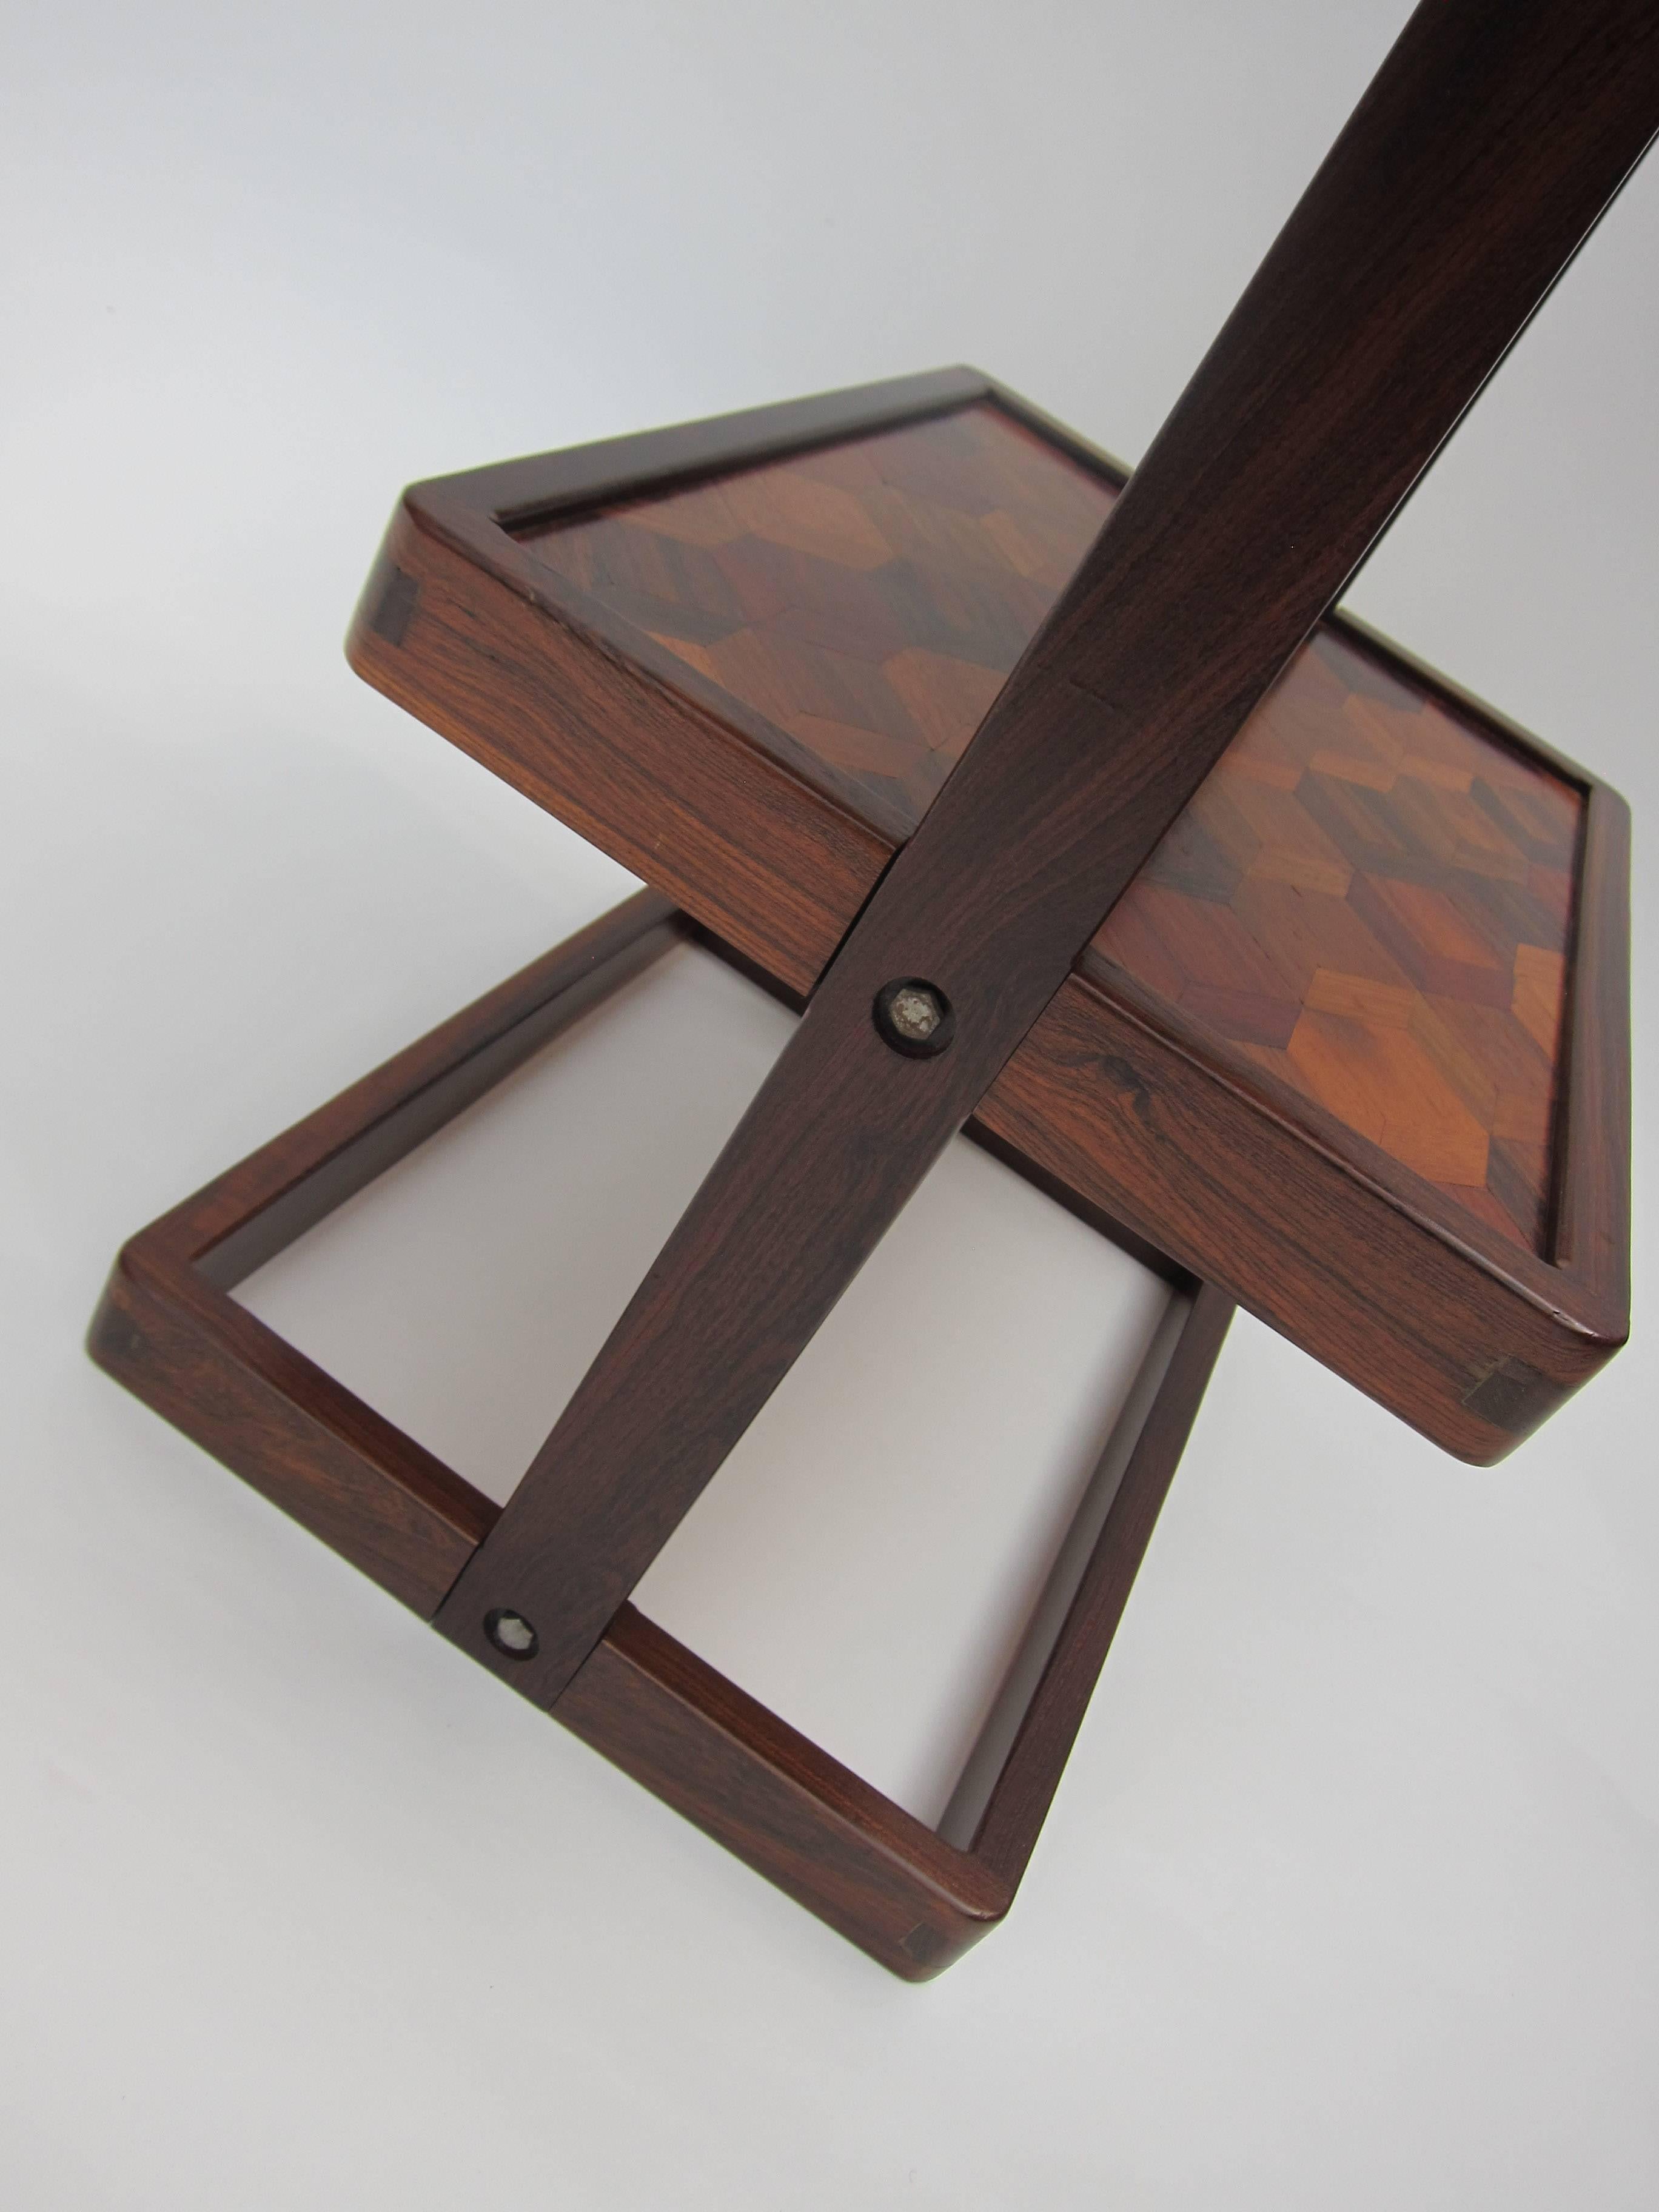 This is a beautifully crafted table by modernist master Don Shoemaker. The frame is solid tropical rosewood (cocobolo) and the 2 tiers show off the different tropical hardwoods in a parquetry pattern to wonderful effect.  
Don Shoemaker is one of